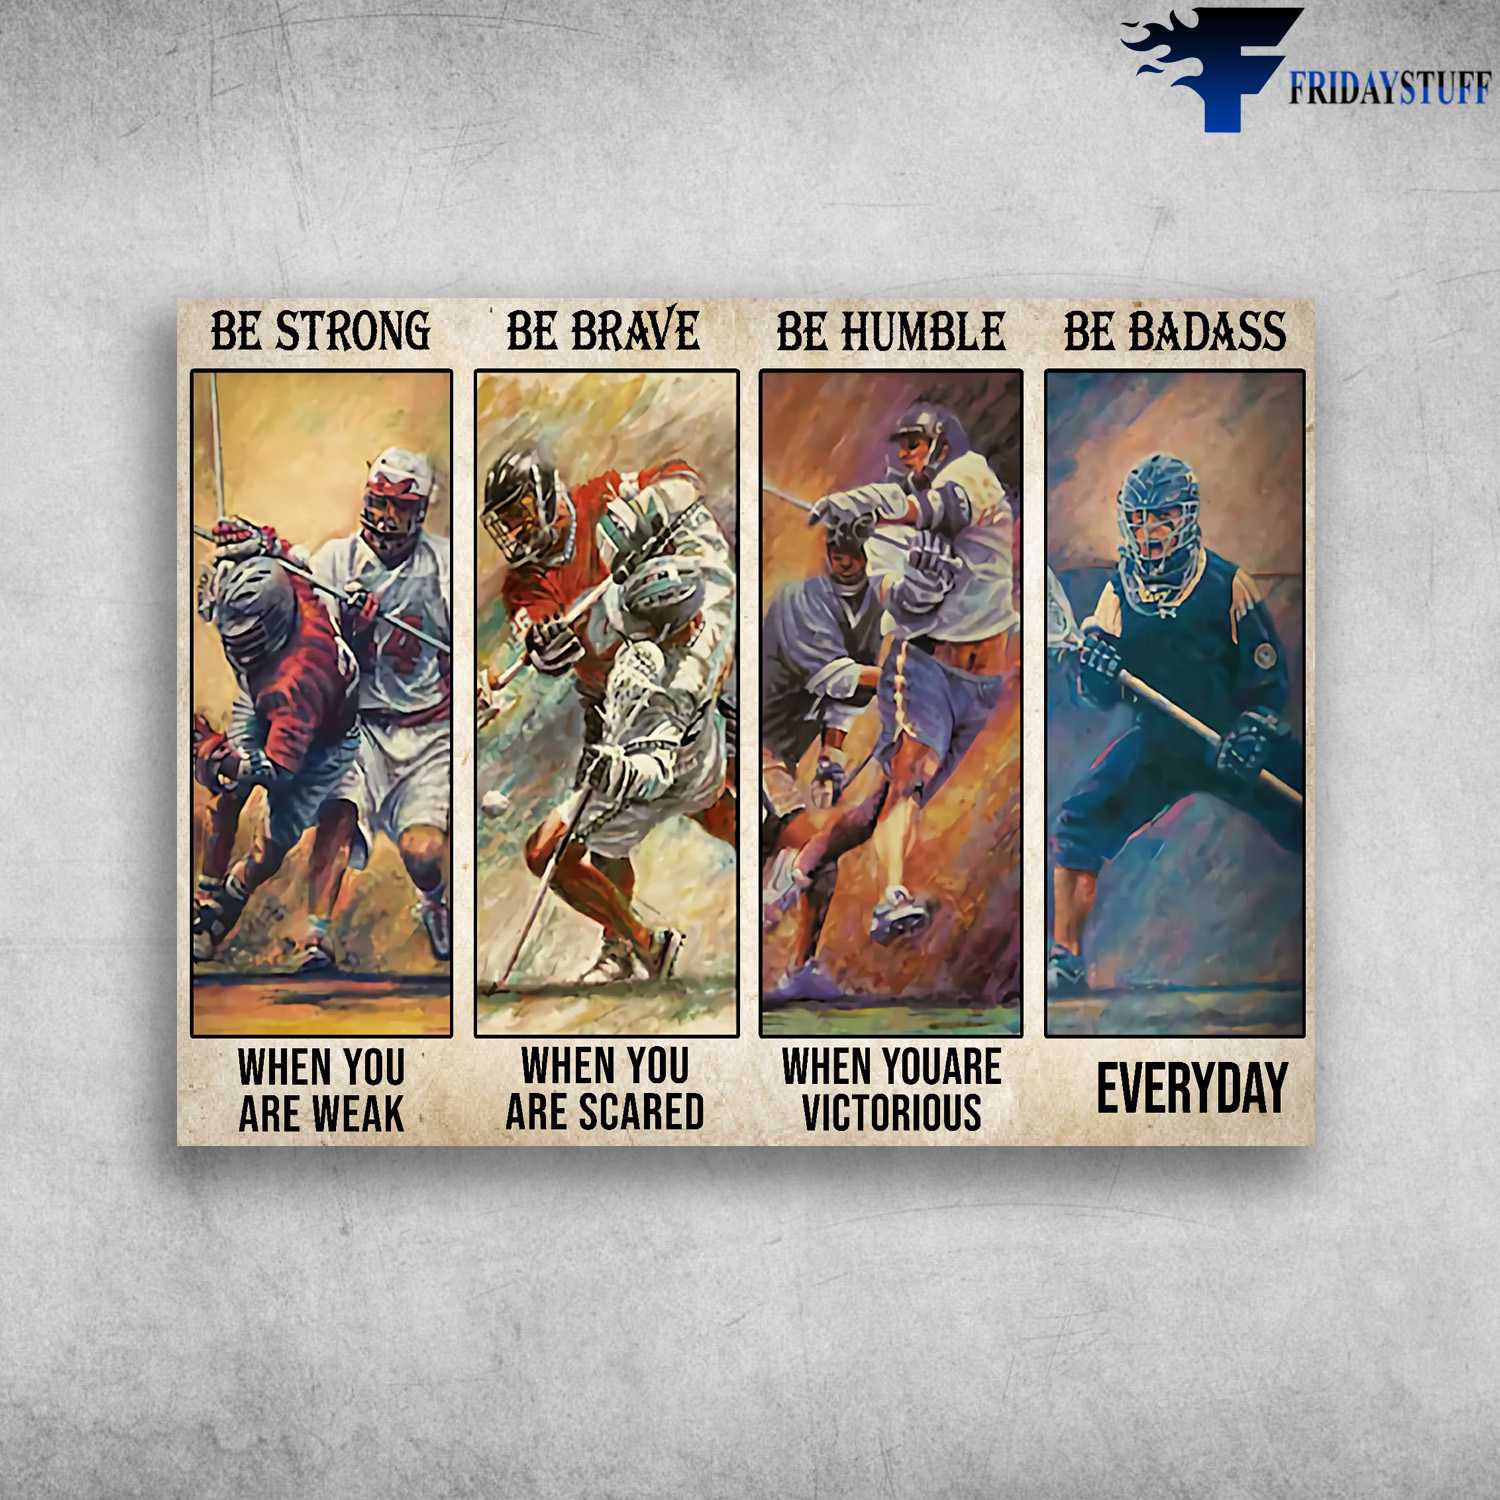 Hockey Player - Be Strong When You Are Weak, Be Brave When You Are Scared, Be Humble When You Are Victorious, Be Badass Everyday, Hockey Poster